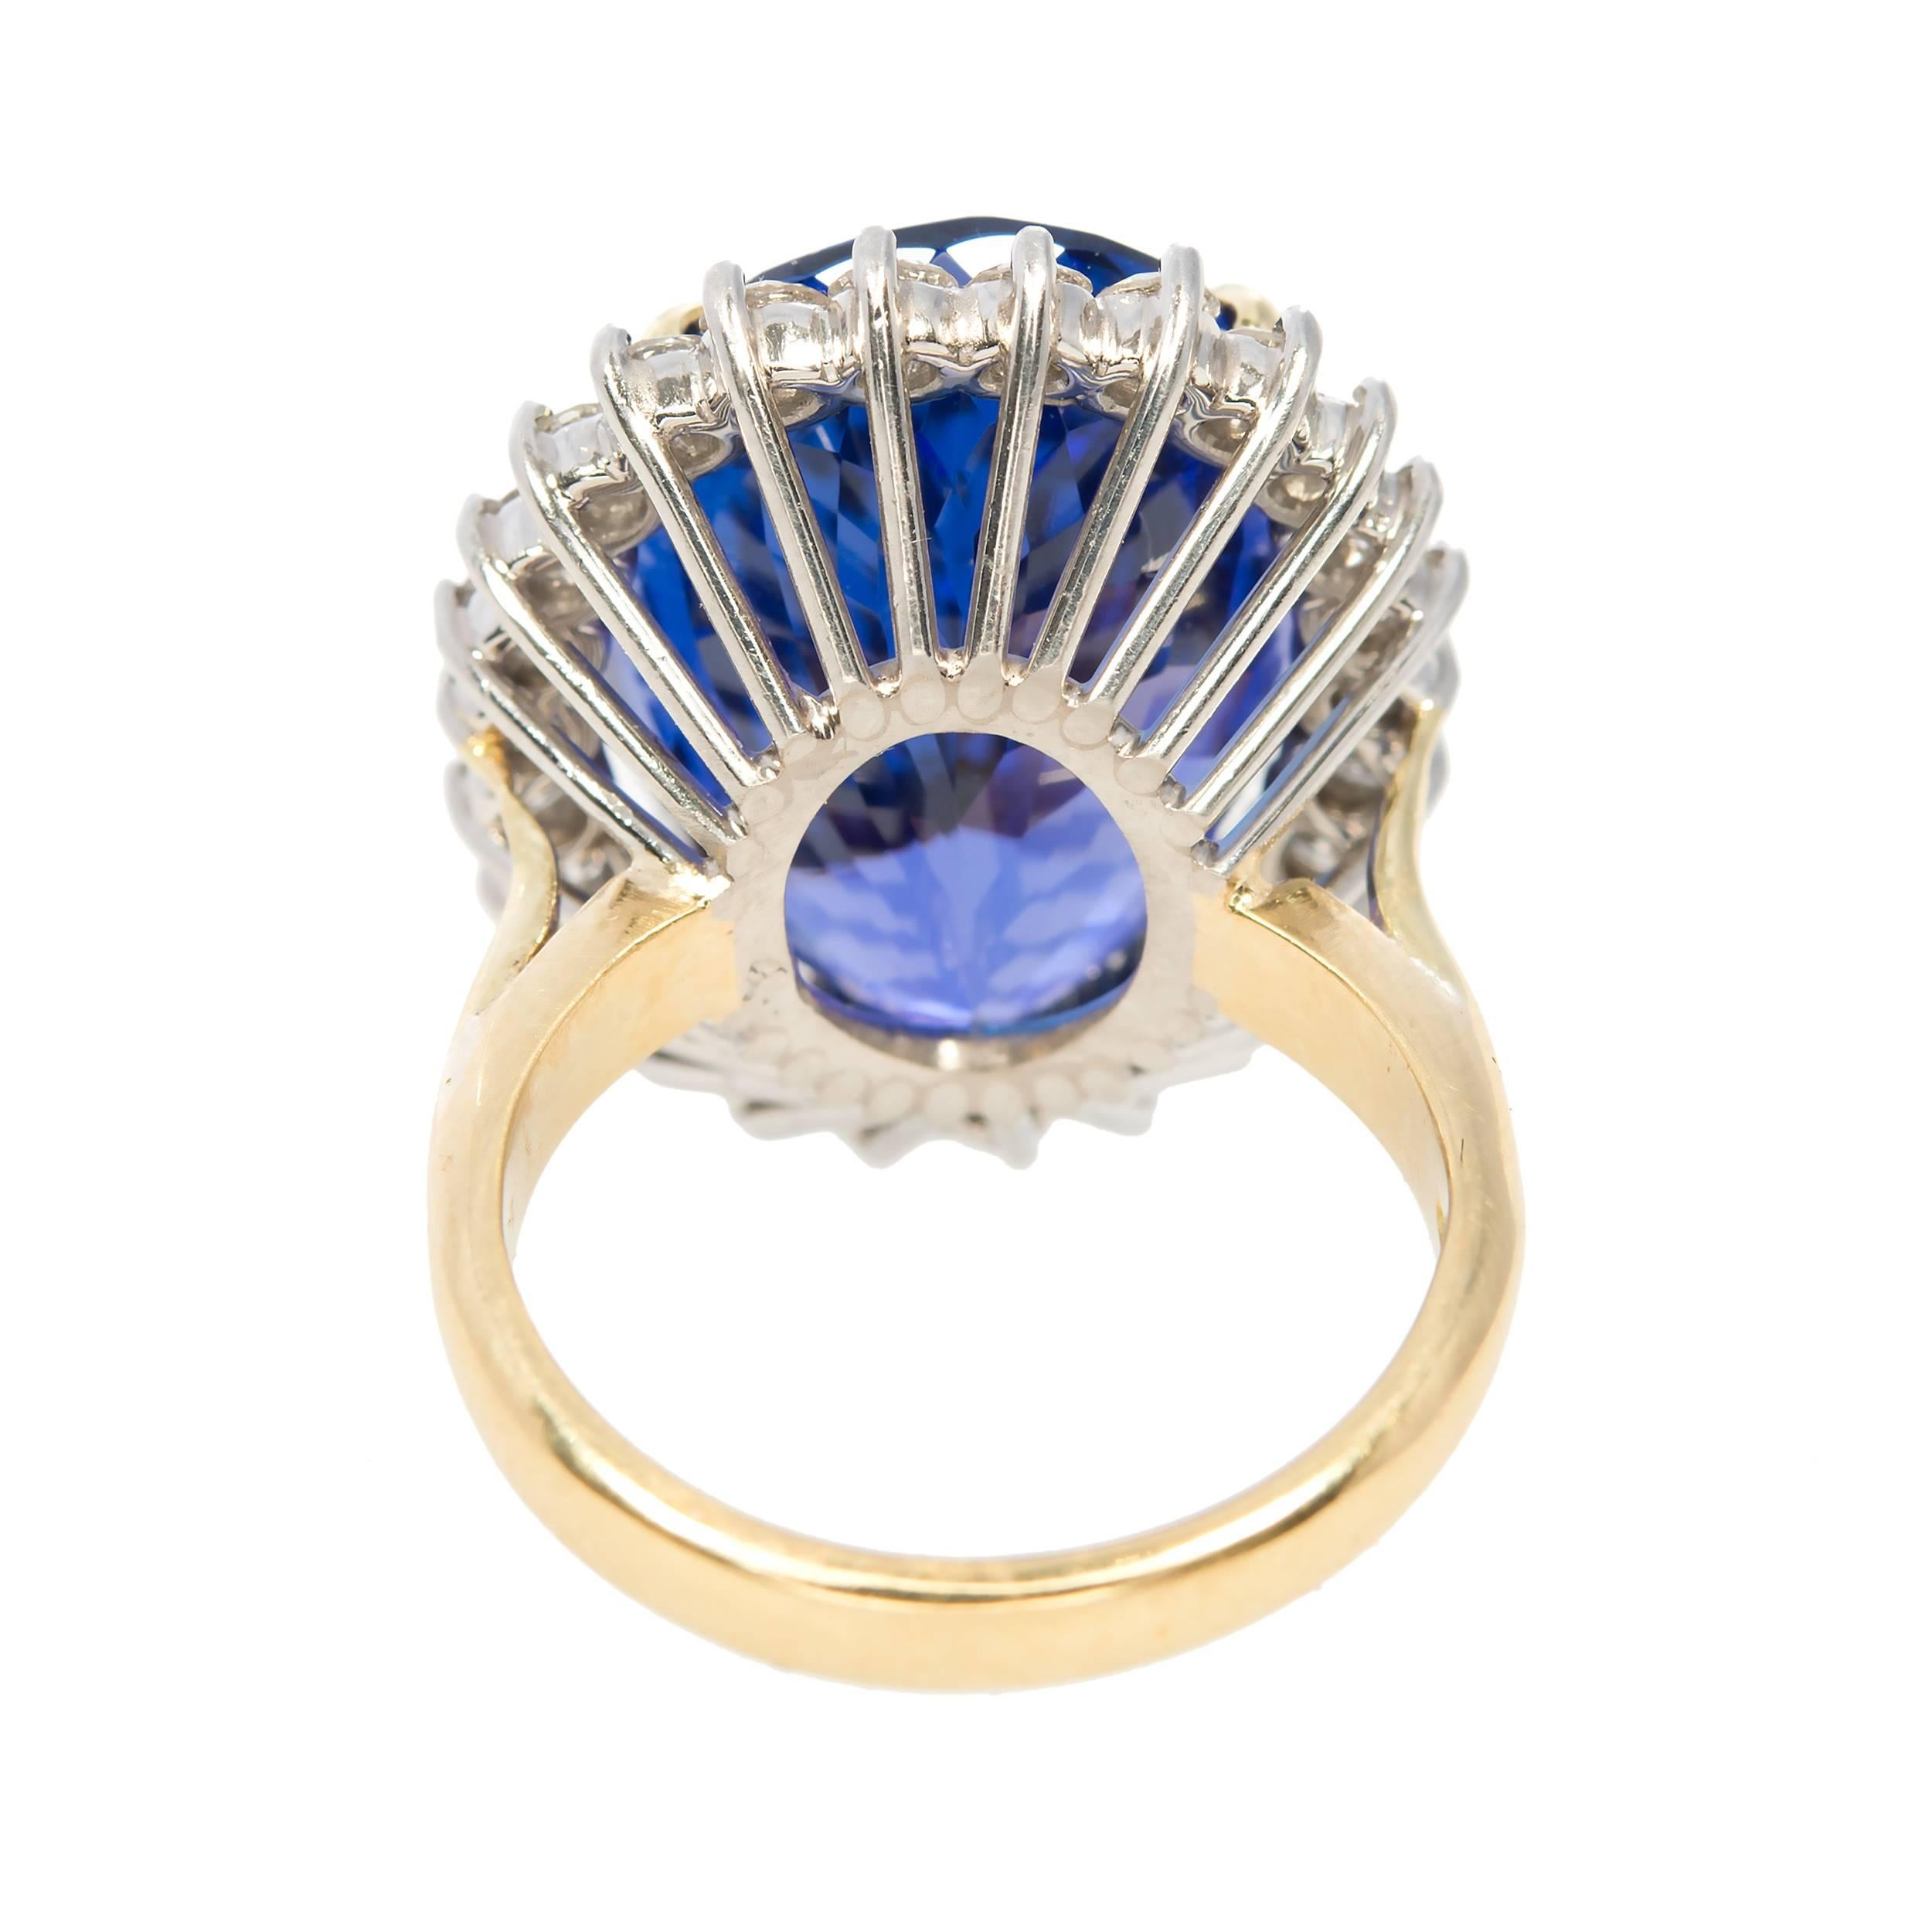 20.51 Carat Oval Tanzanite Diamond Gold Halo Cocktail Ring In Good Condition For Sale In Stamford, CT